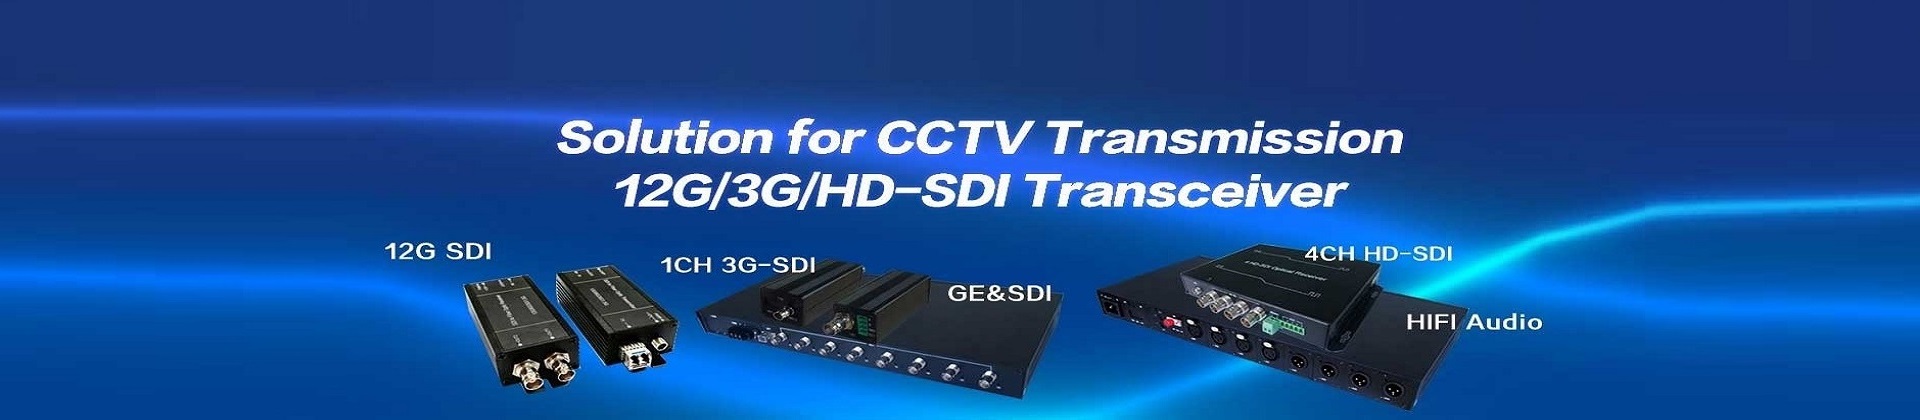 audio&video transceiver Product